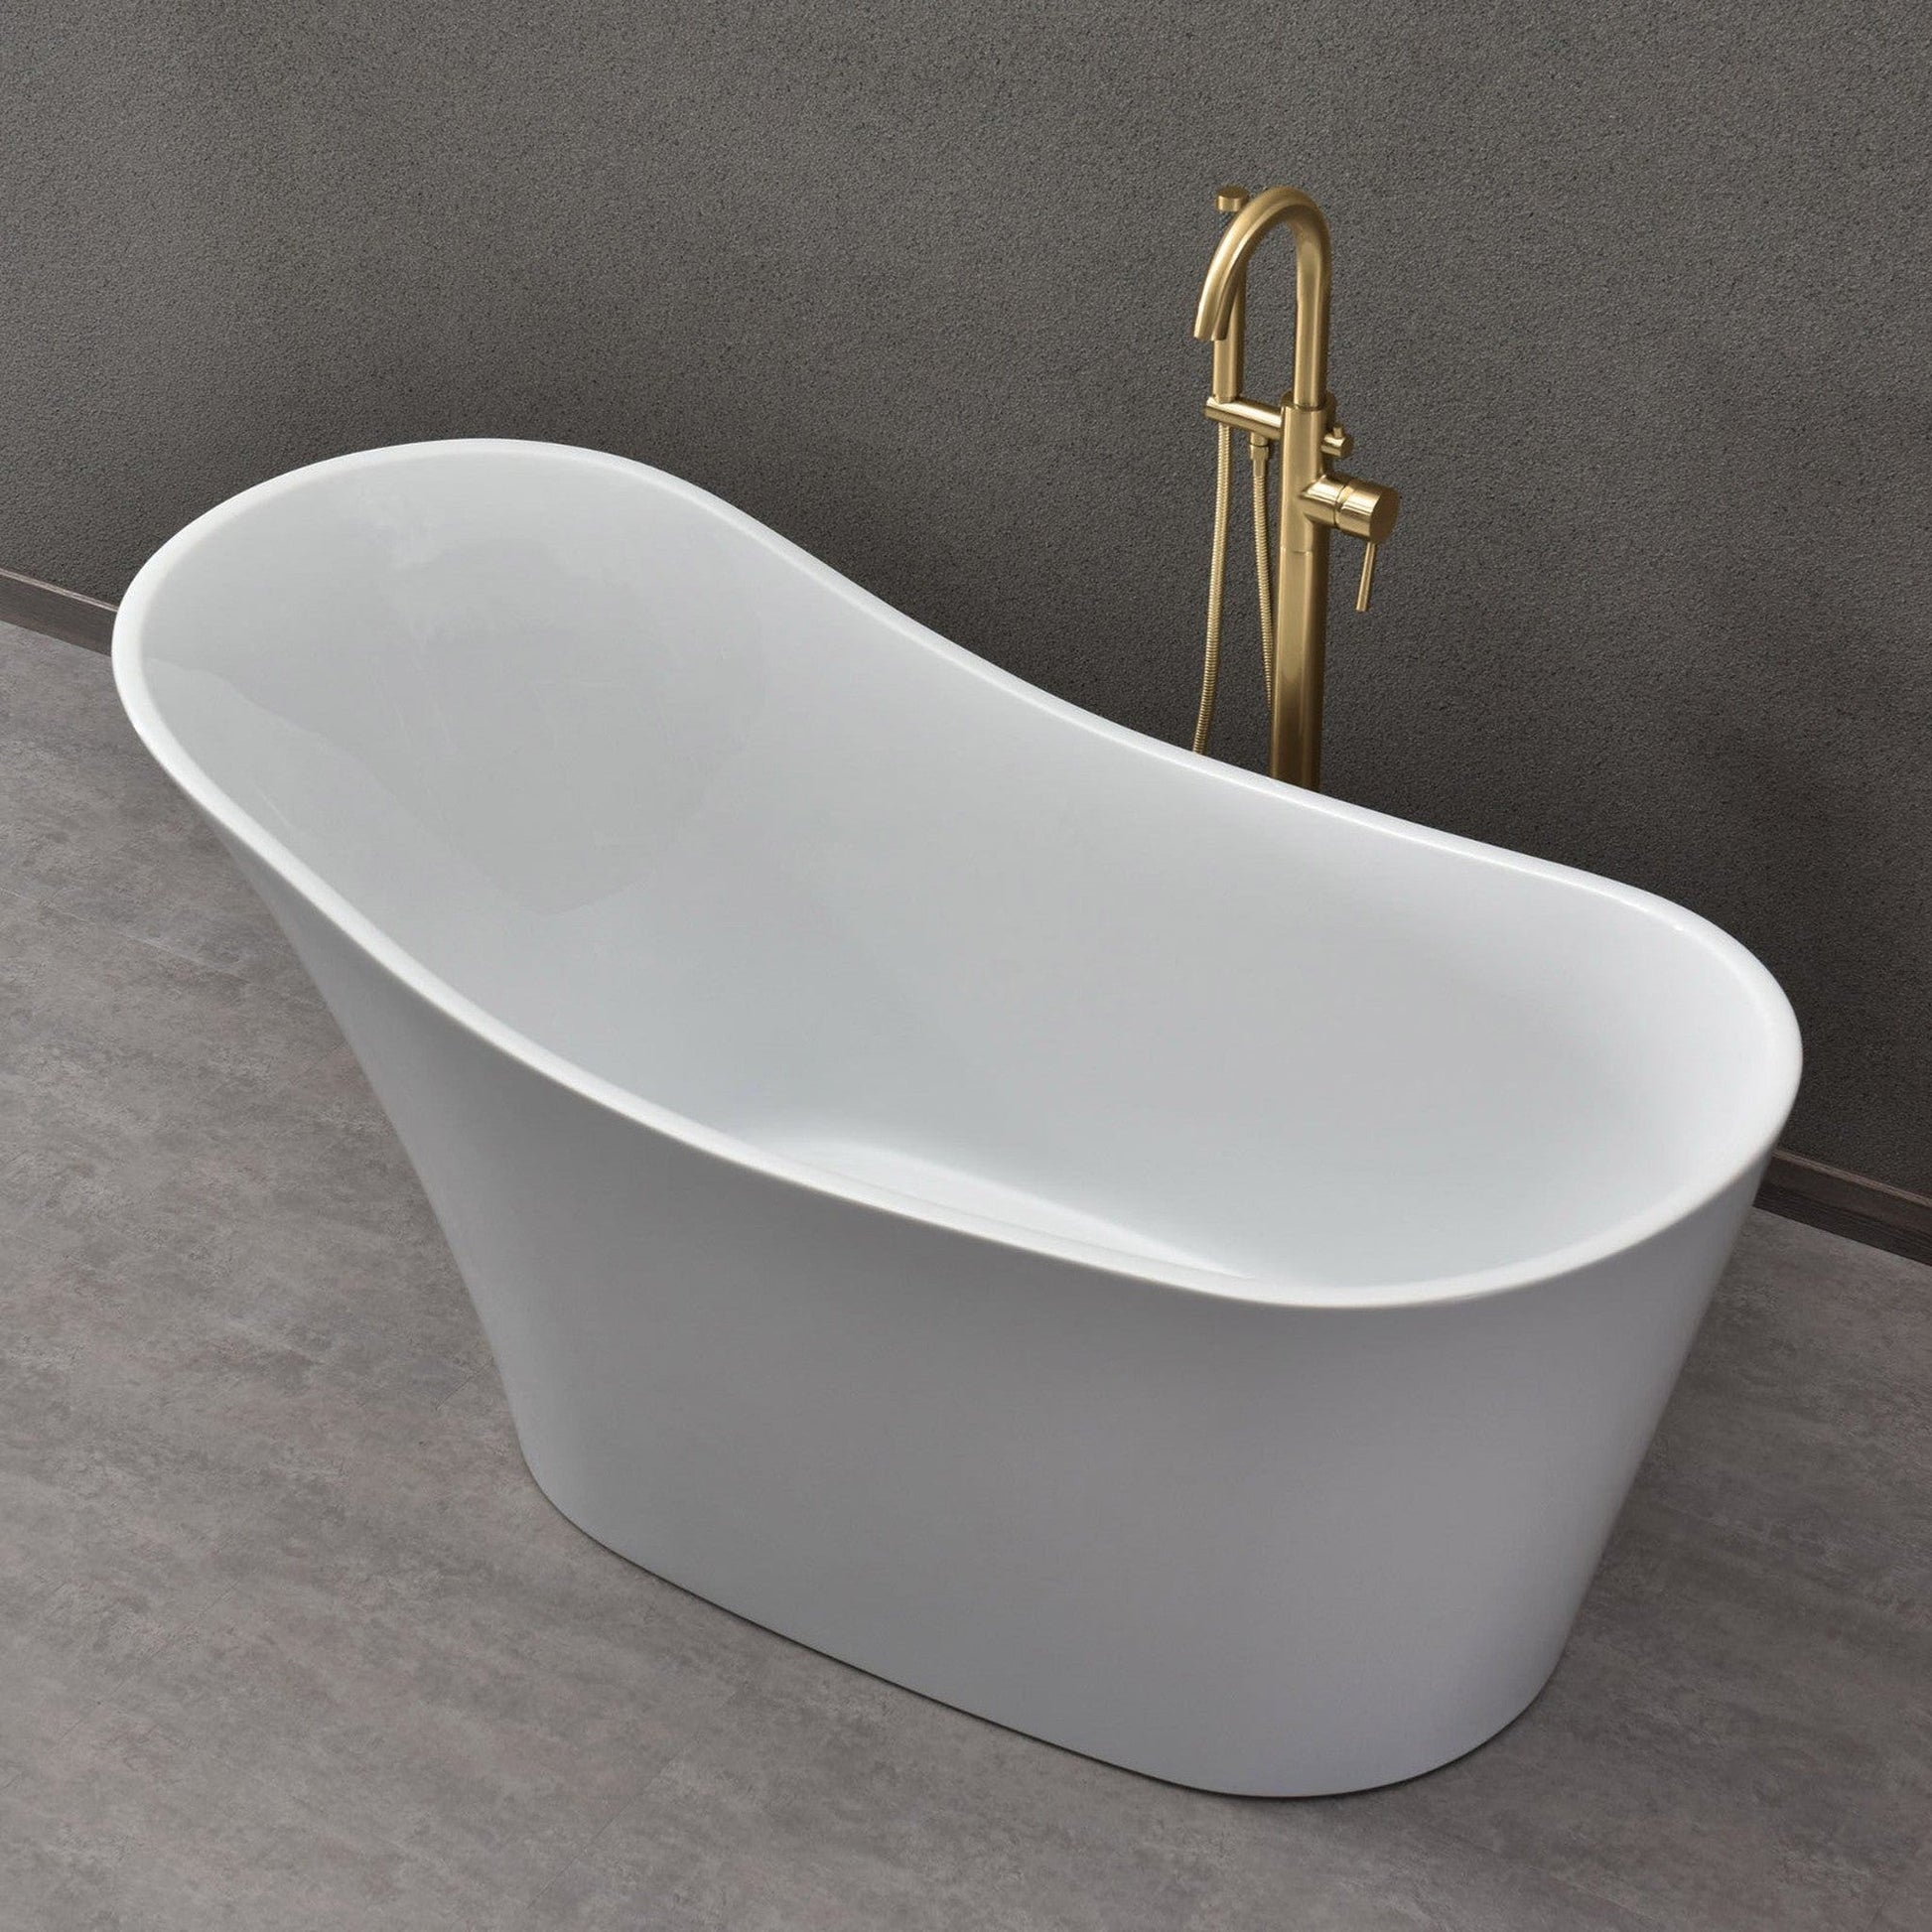 WoodBridge B0029 59" White Acrylic Freestanding Soaking Bathtub With Brushed Gold Drain, Overflow, F0073BGVT Tub Filler and Caddy Tray